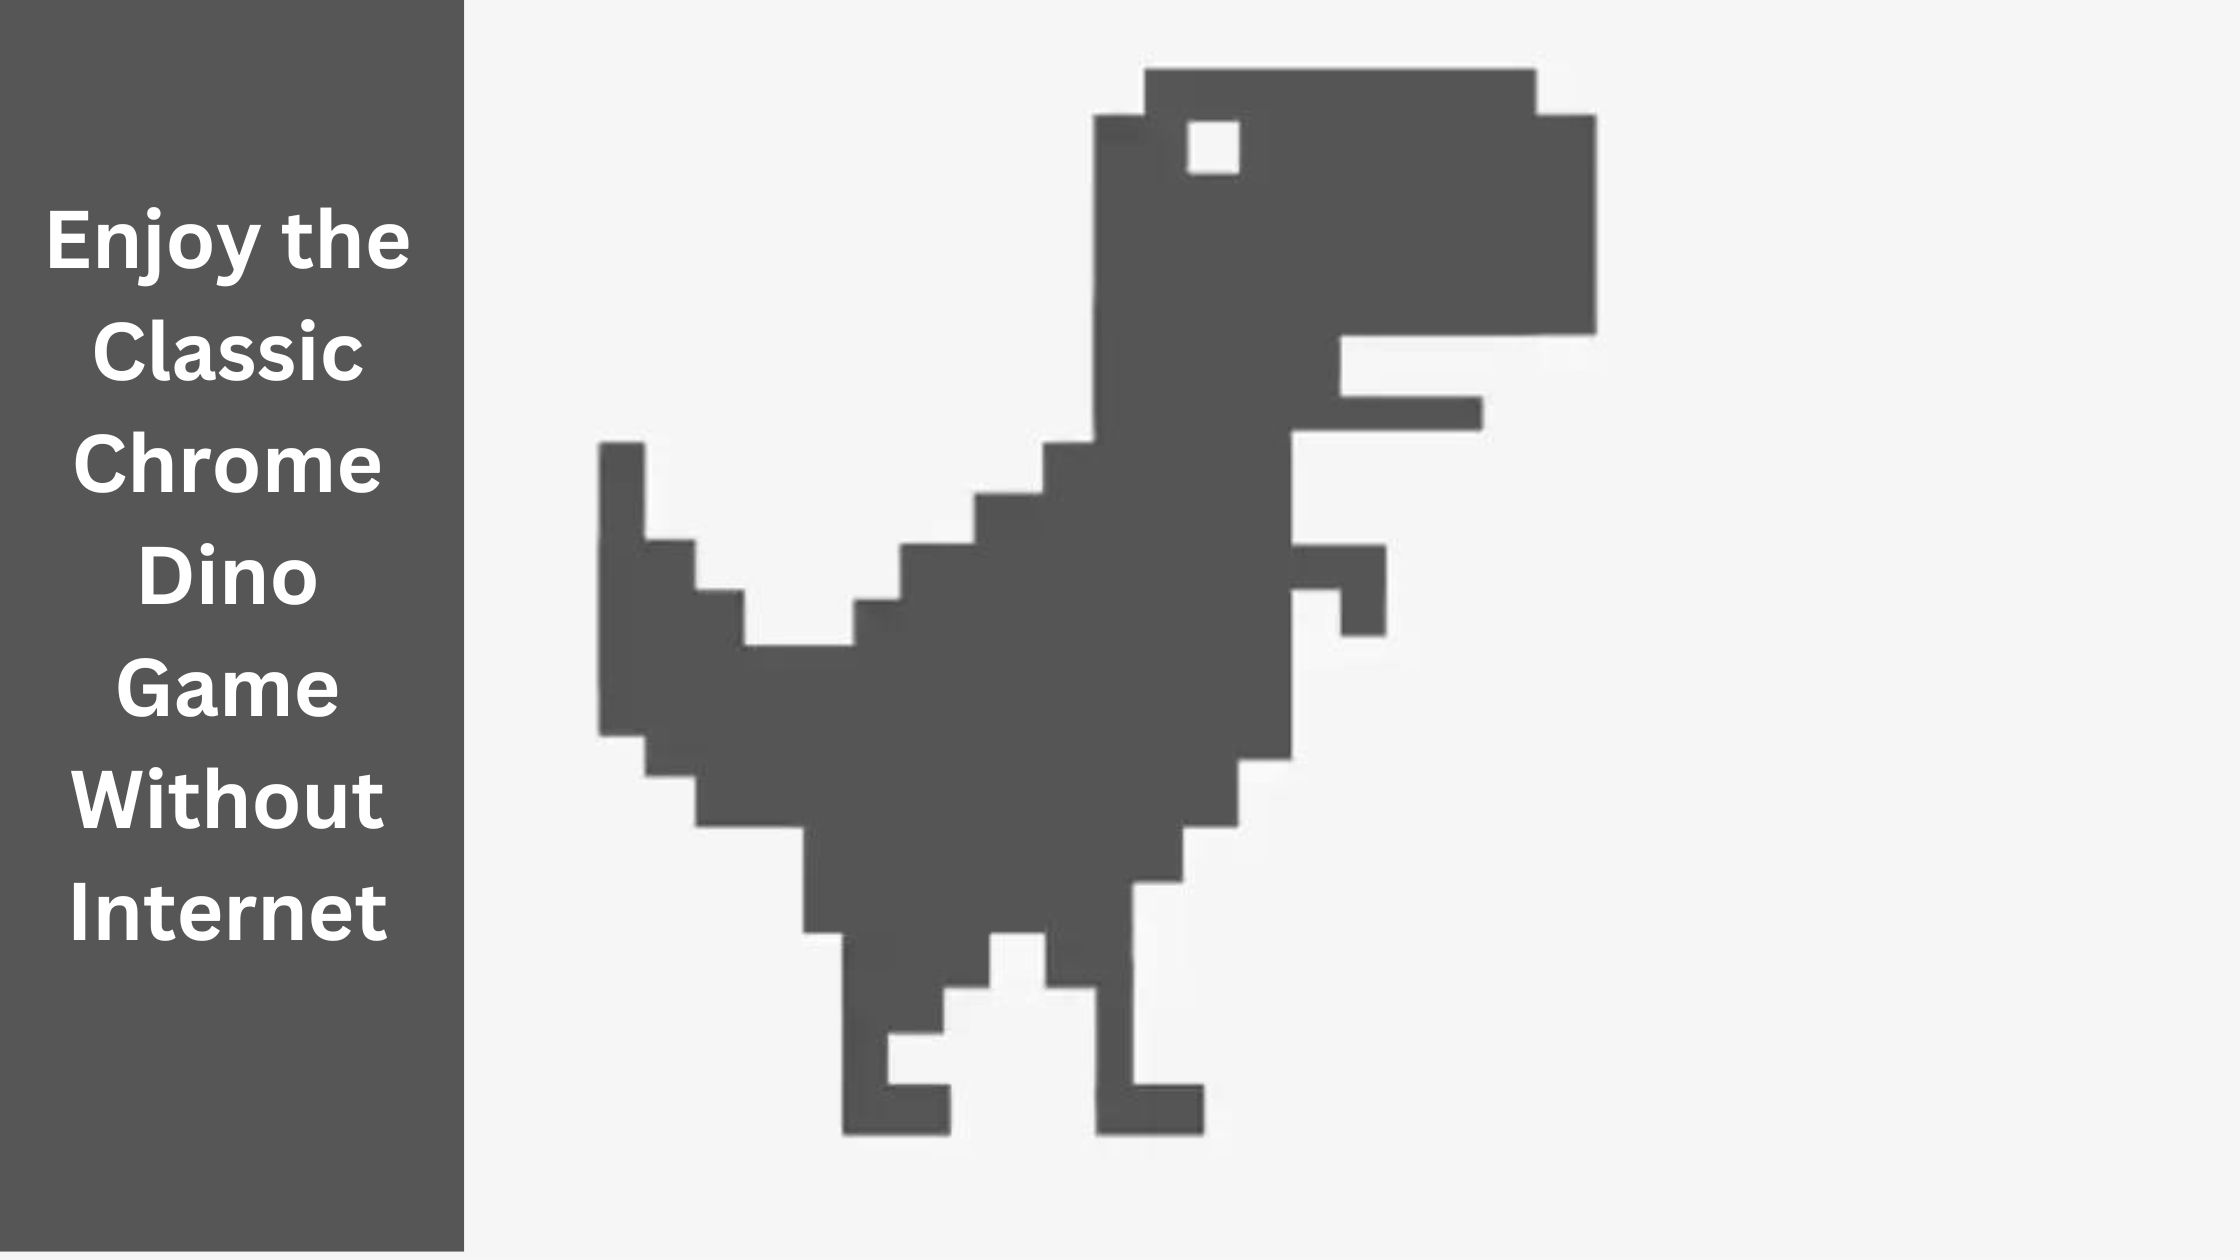 Enjoy the Classic Chrome Dino Game Without Internet